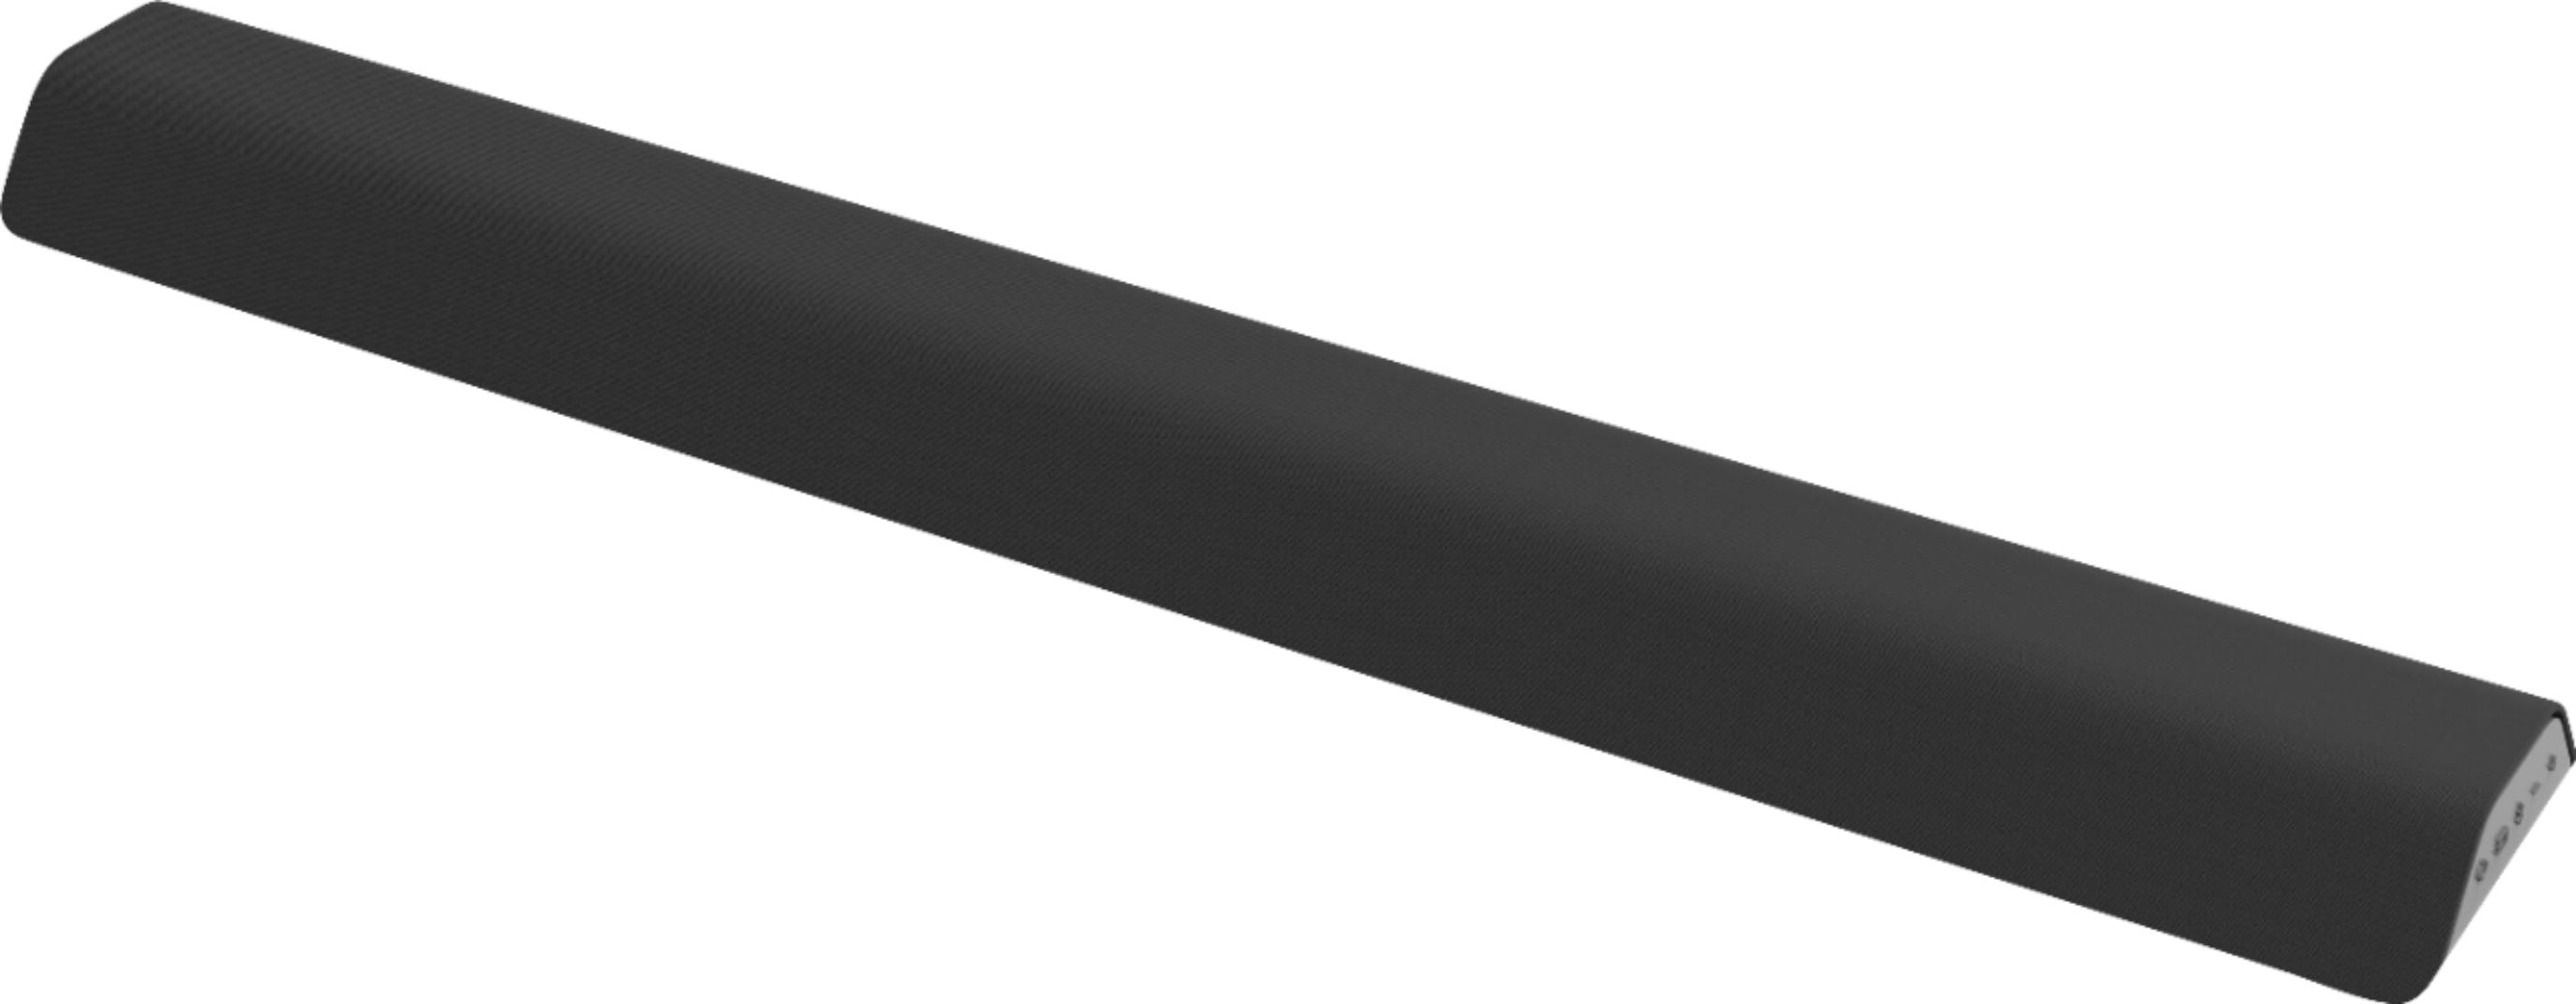 Angle View: VIZIO - 2.1-Channel M-Series Soundbar with Built-in Subwoofers and DTS Virtual:X - Dark Charcoal